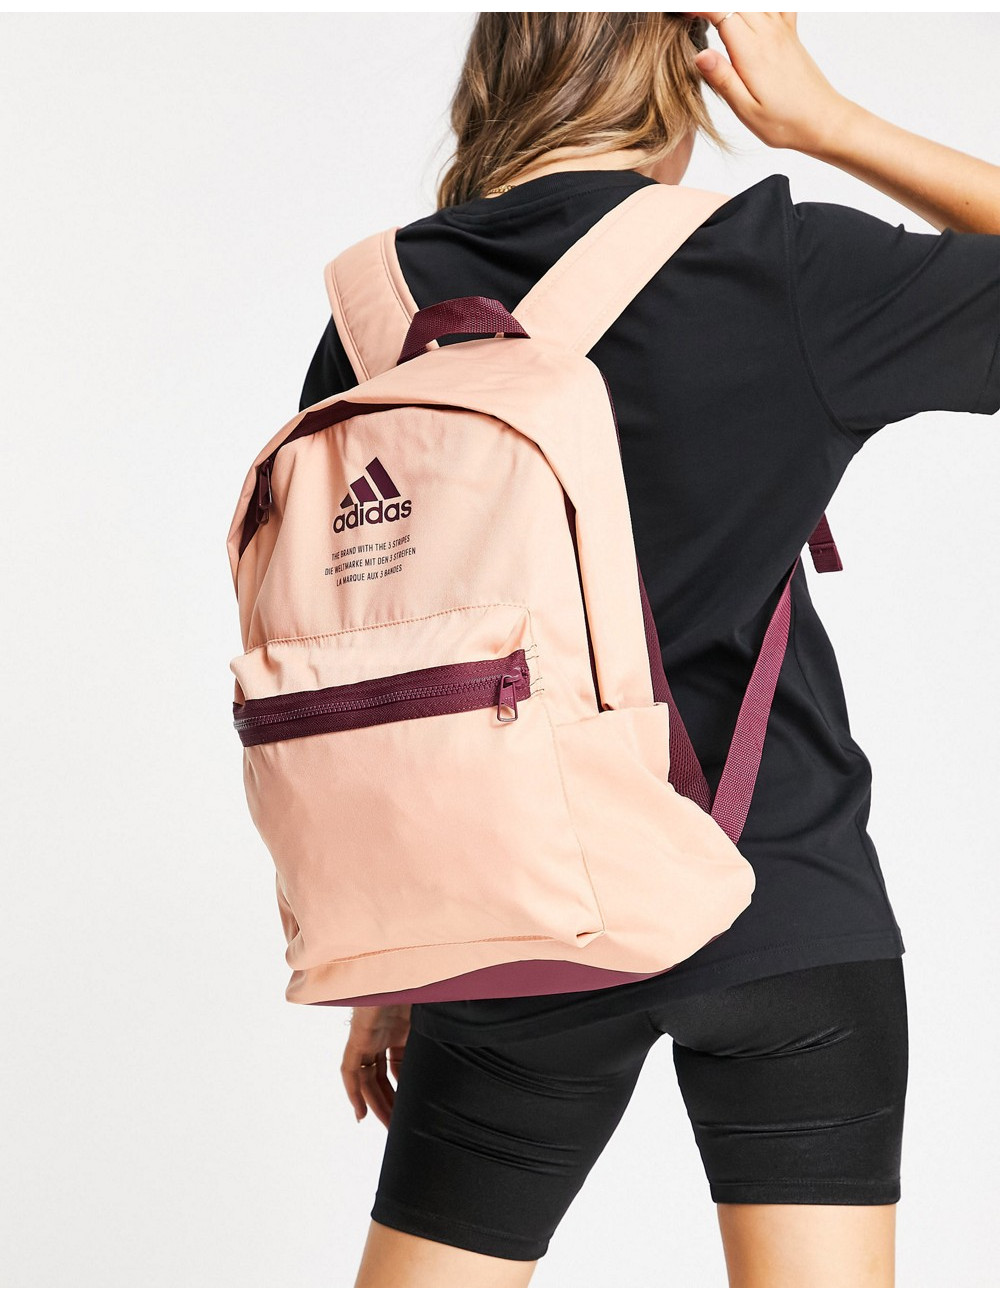 adidas backpack in peach